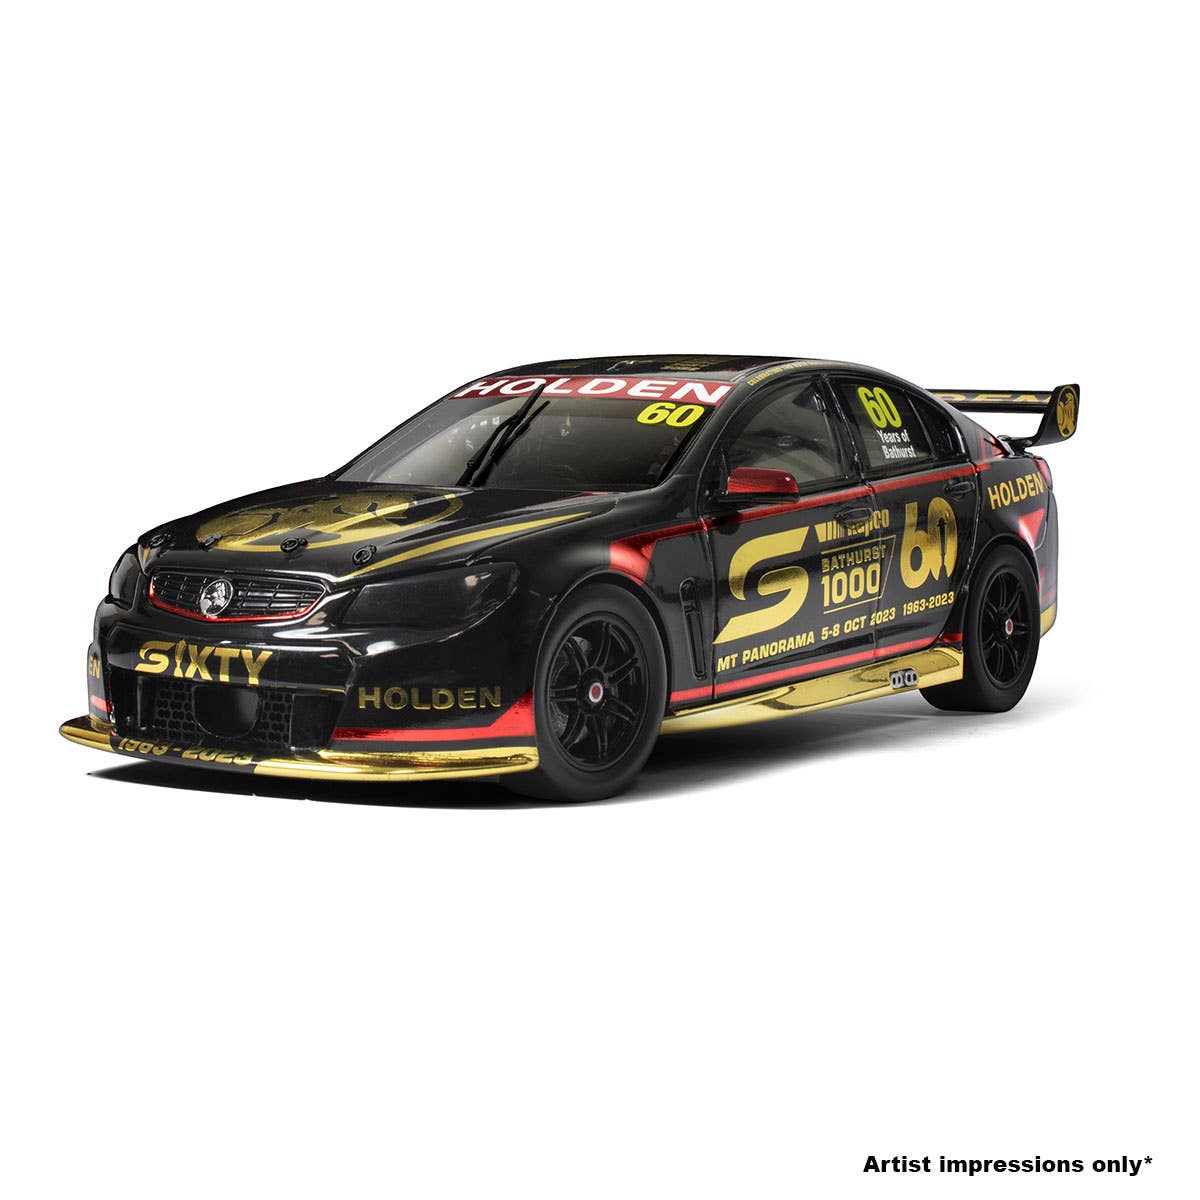 2023 BATHURST 1000 - HOLDEN COMMODORE VF V8 SUPERCAR - 60th ANNIVERSARY OF THE BATHURST GREAT RACE - SPECIAL LIMITED EDITION - 1:43 Scale Diecast Model Car